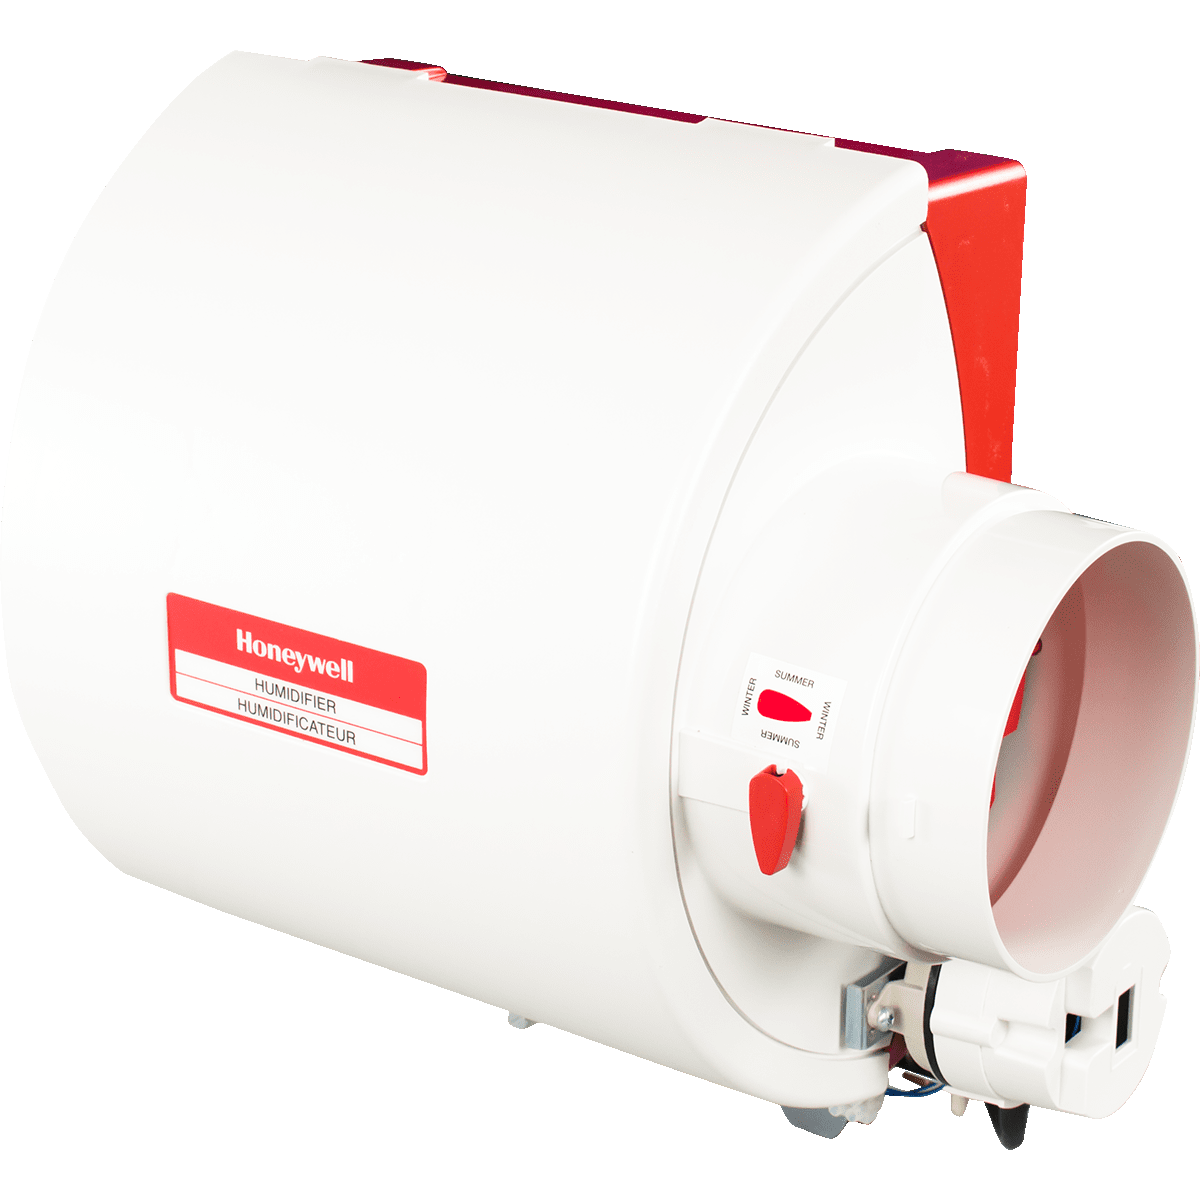 https://s3-assets.sylvane.com/media/images/products/honeywell-he240-whole-house-bypass-humidifier-angle.png